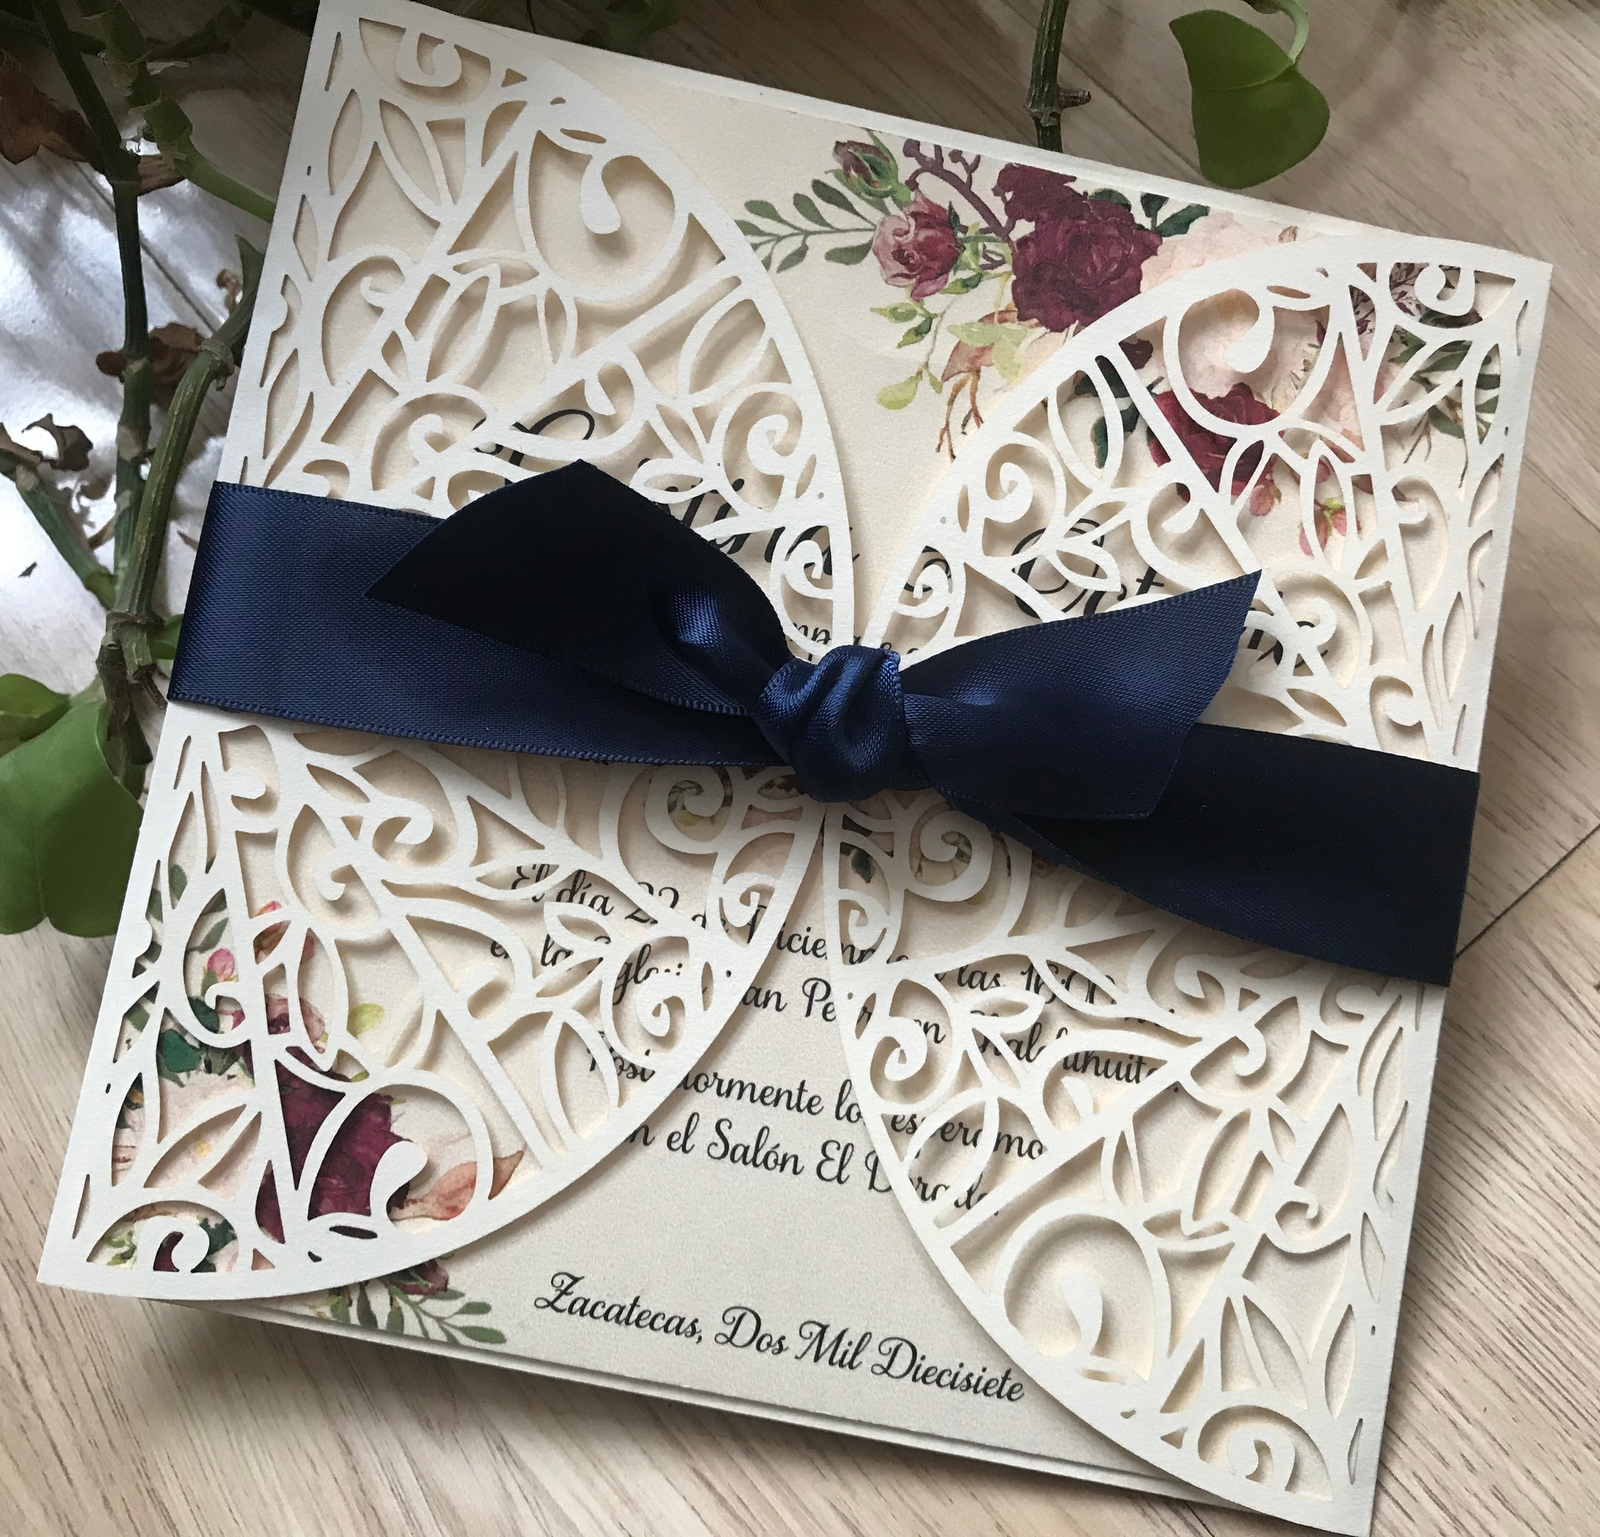 Pearl Cream laser cut wedding invitations cards with ribbons,invitations covers